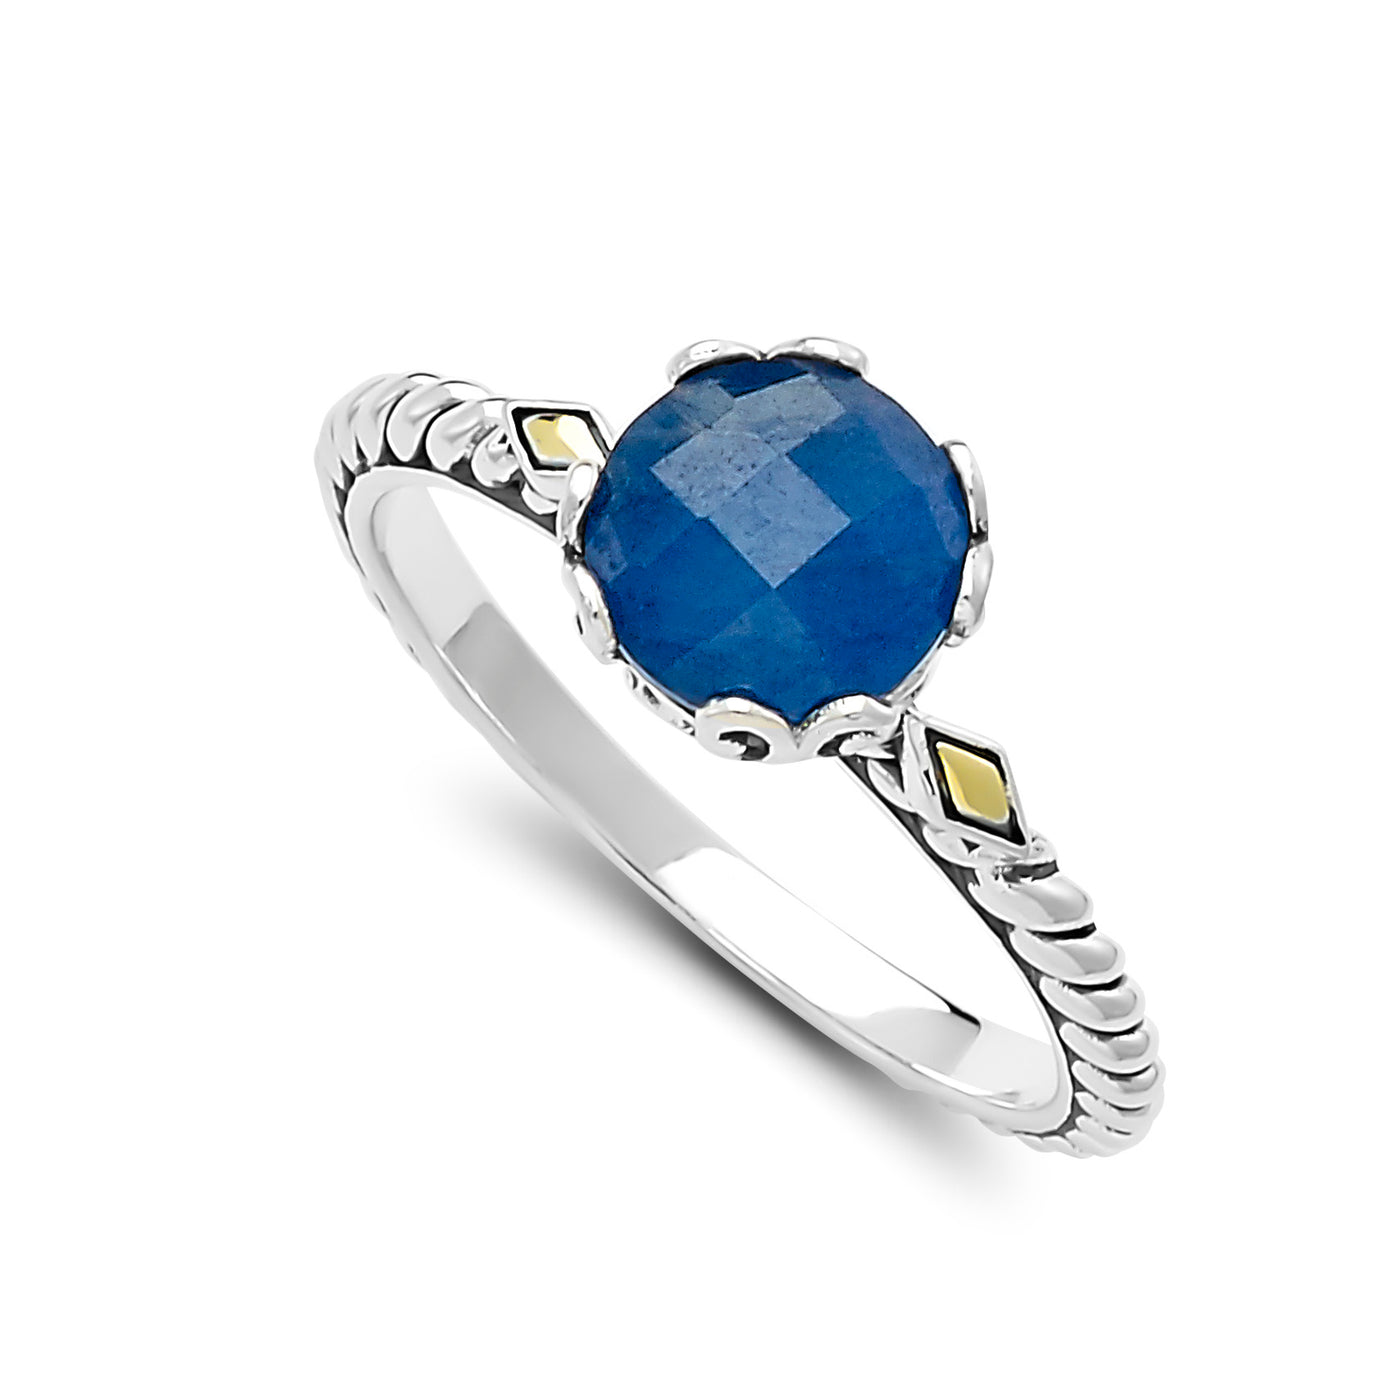 SS/18K BIRTHSTONE RING IN BLUE SAPPHIRE Size:7